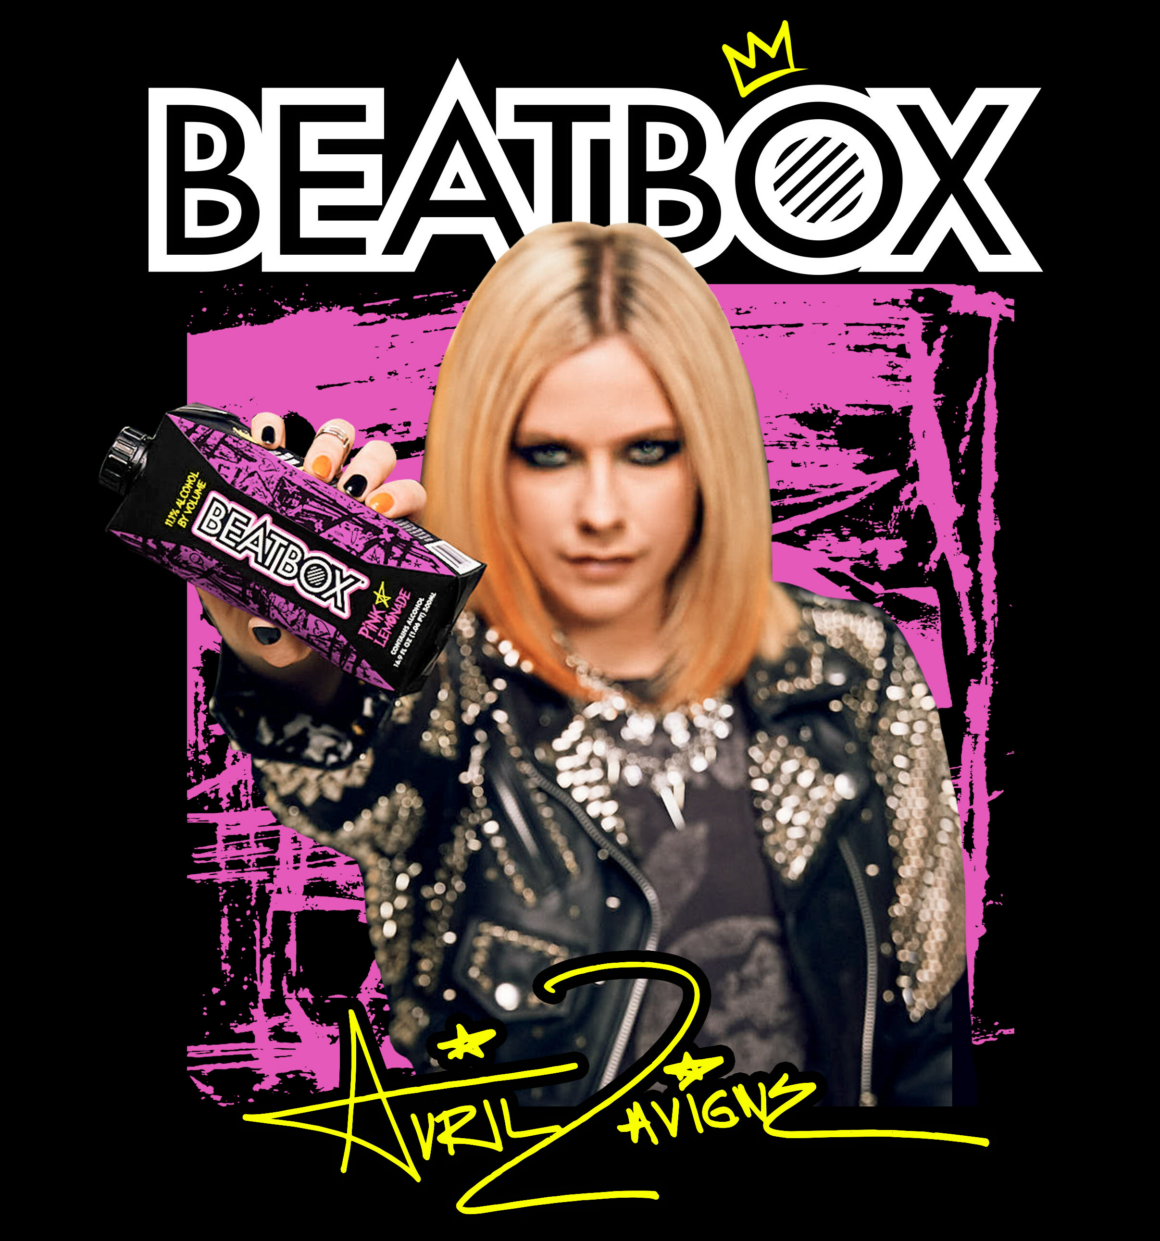 Avril Lavigne partners with BeatBox